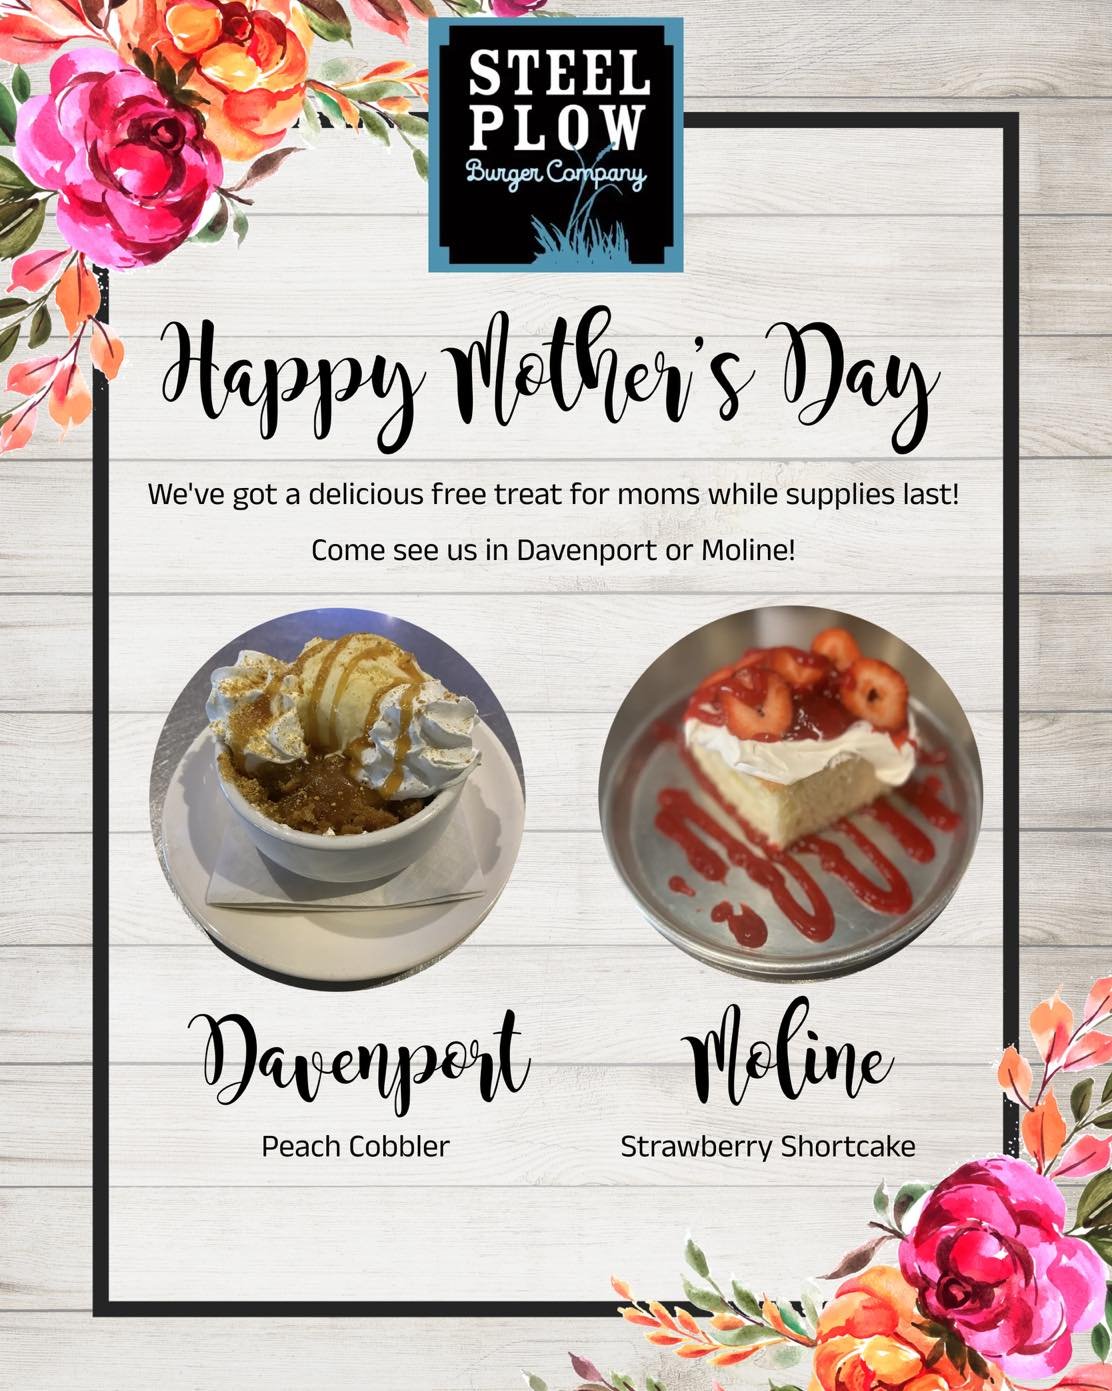 Bring mom to Steel Plow TODAY for a delicious FREE treat while supplies last! 💐🍑🍓